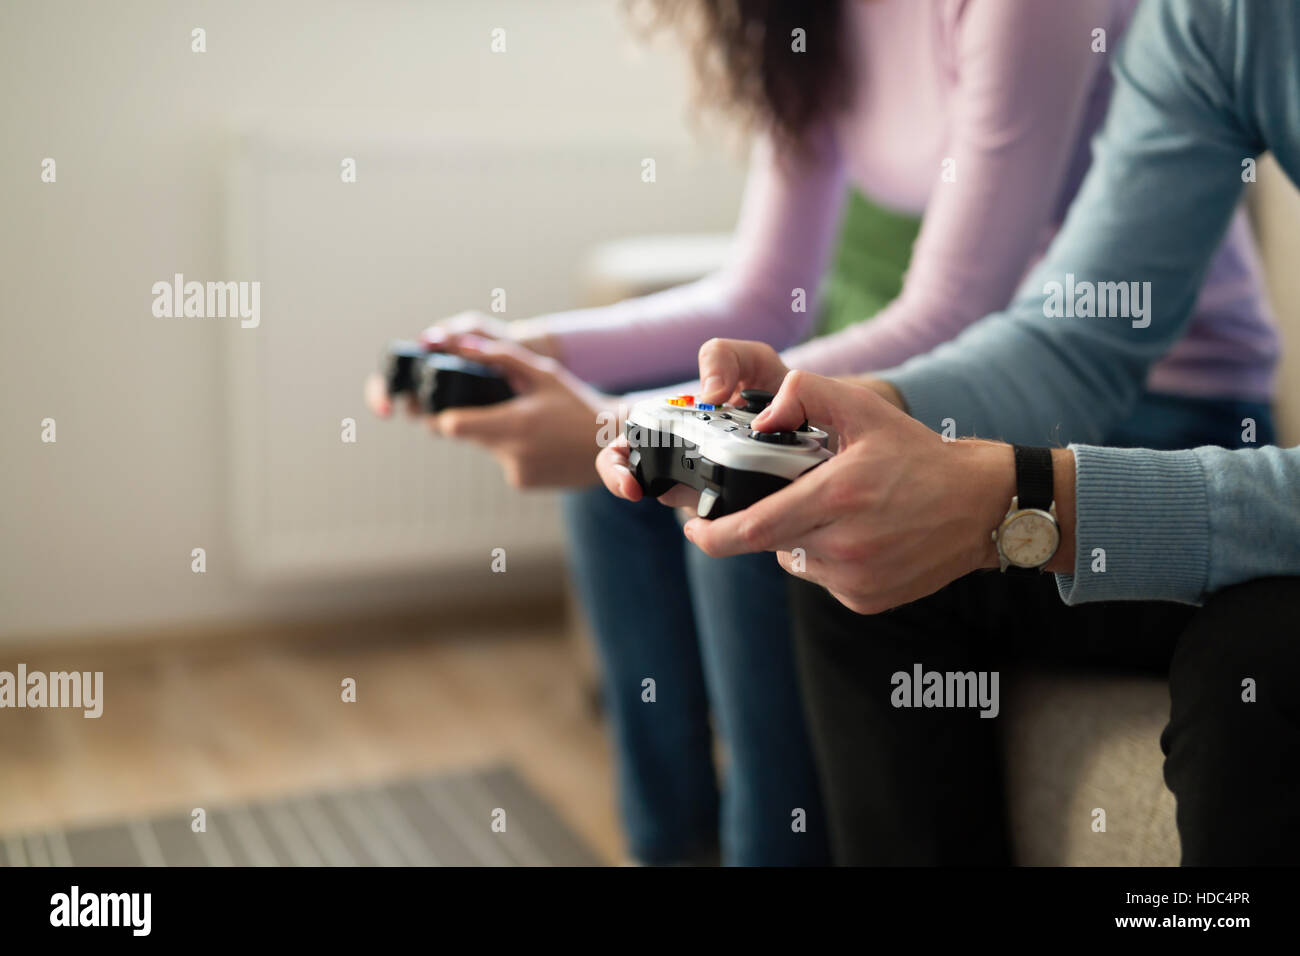 Young people playing video games on console controllers Stock Photo